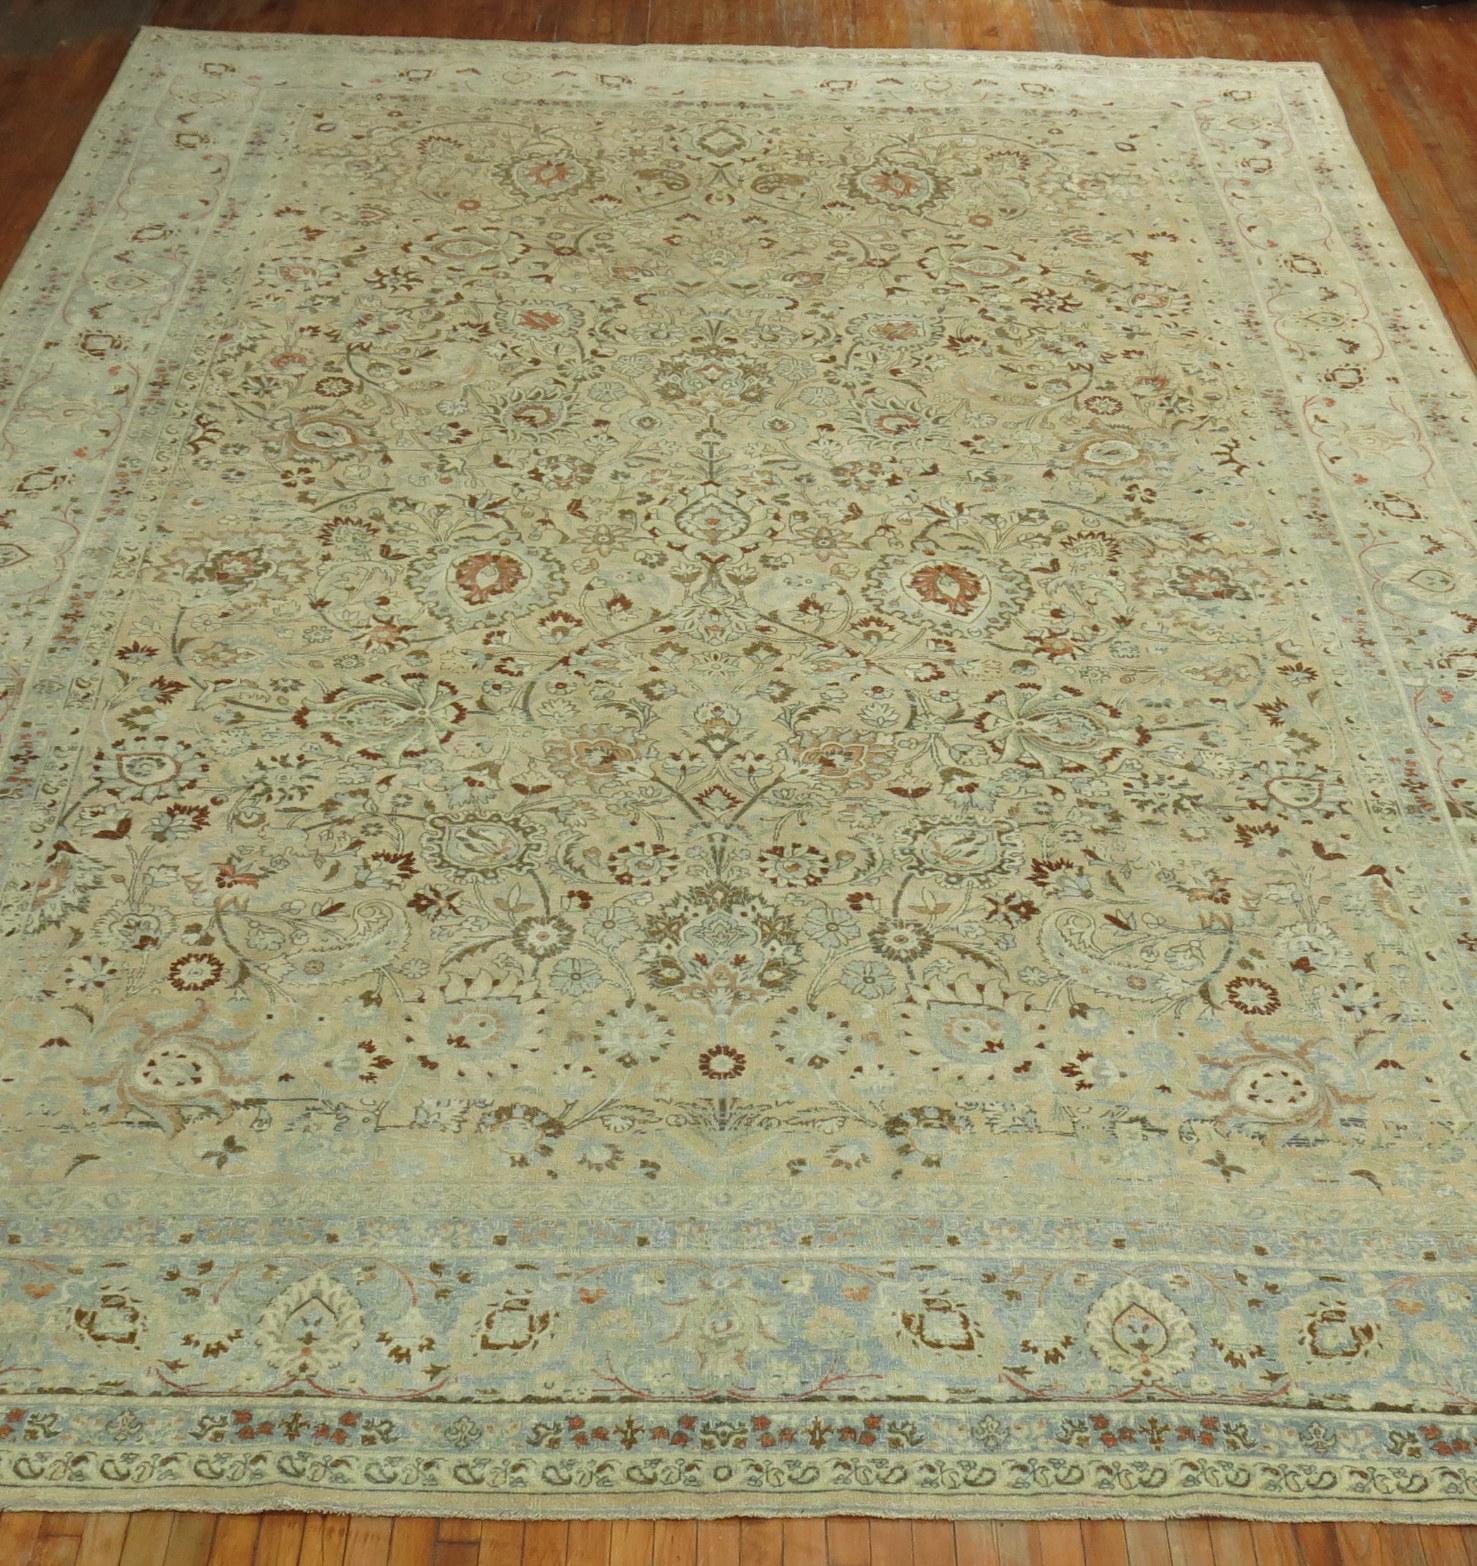 Stunning Tan Icy Blue Antique Persian Formal Meshed Rug, 20th Century For Sale 7